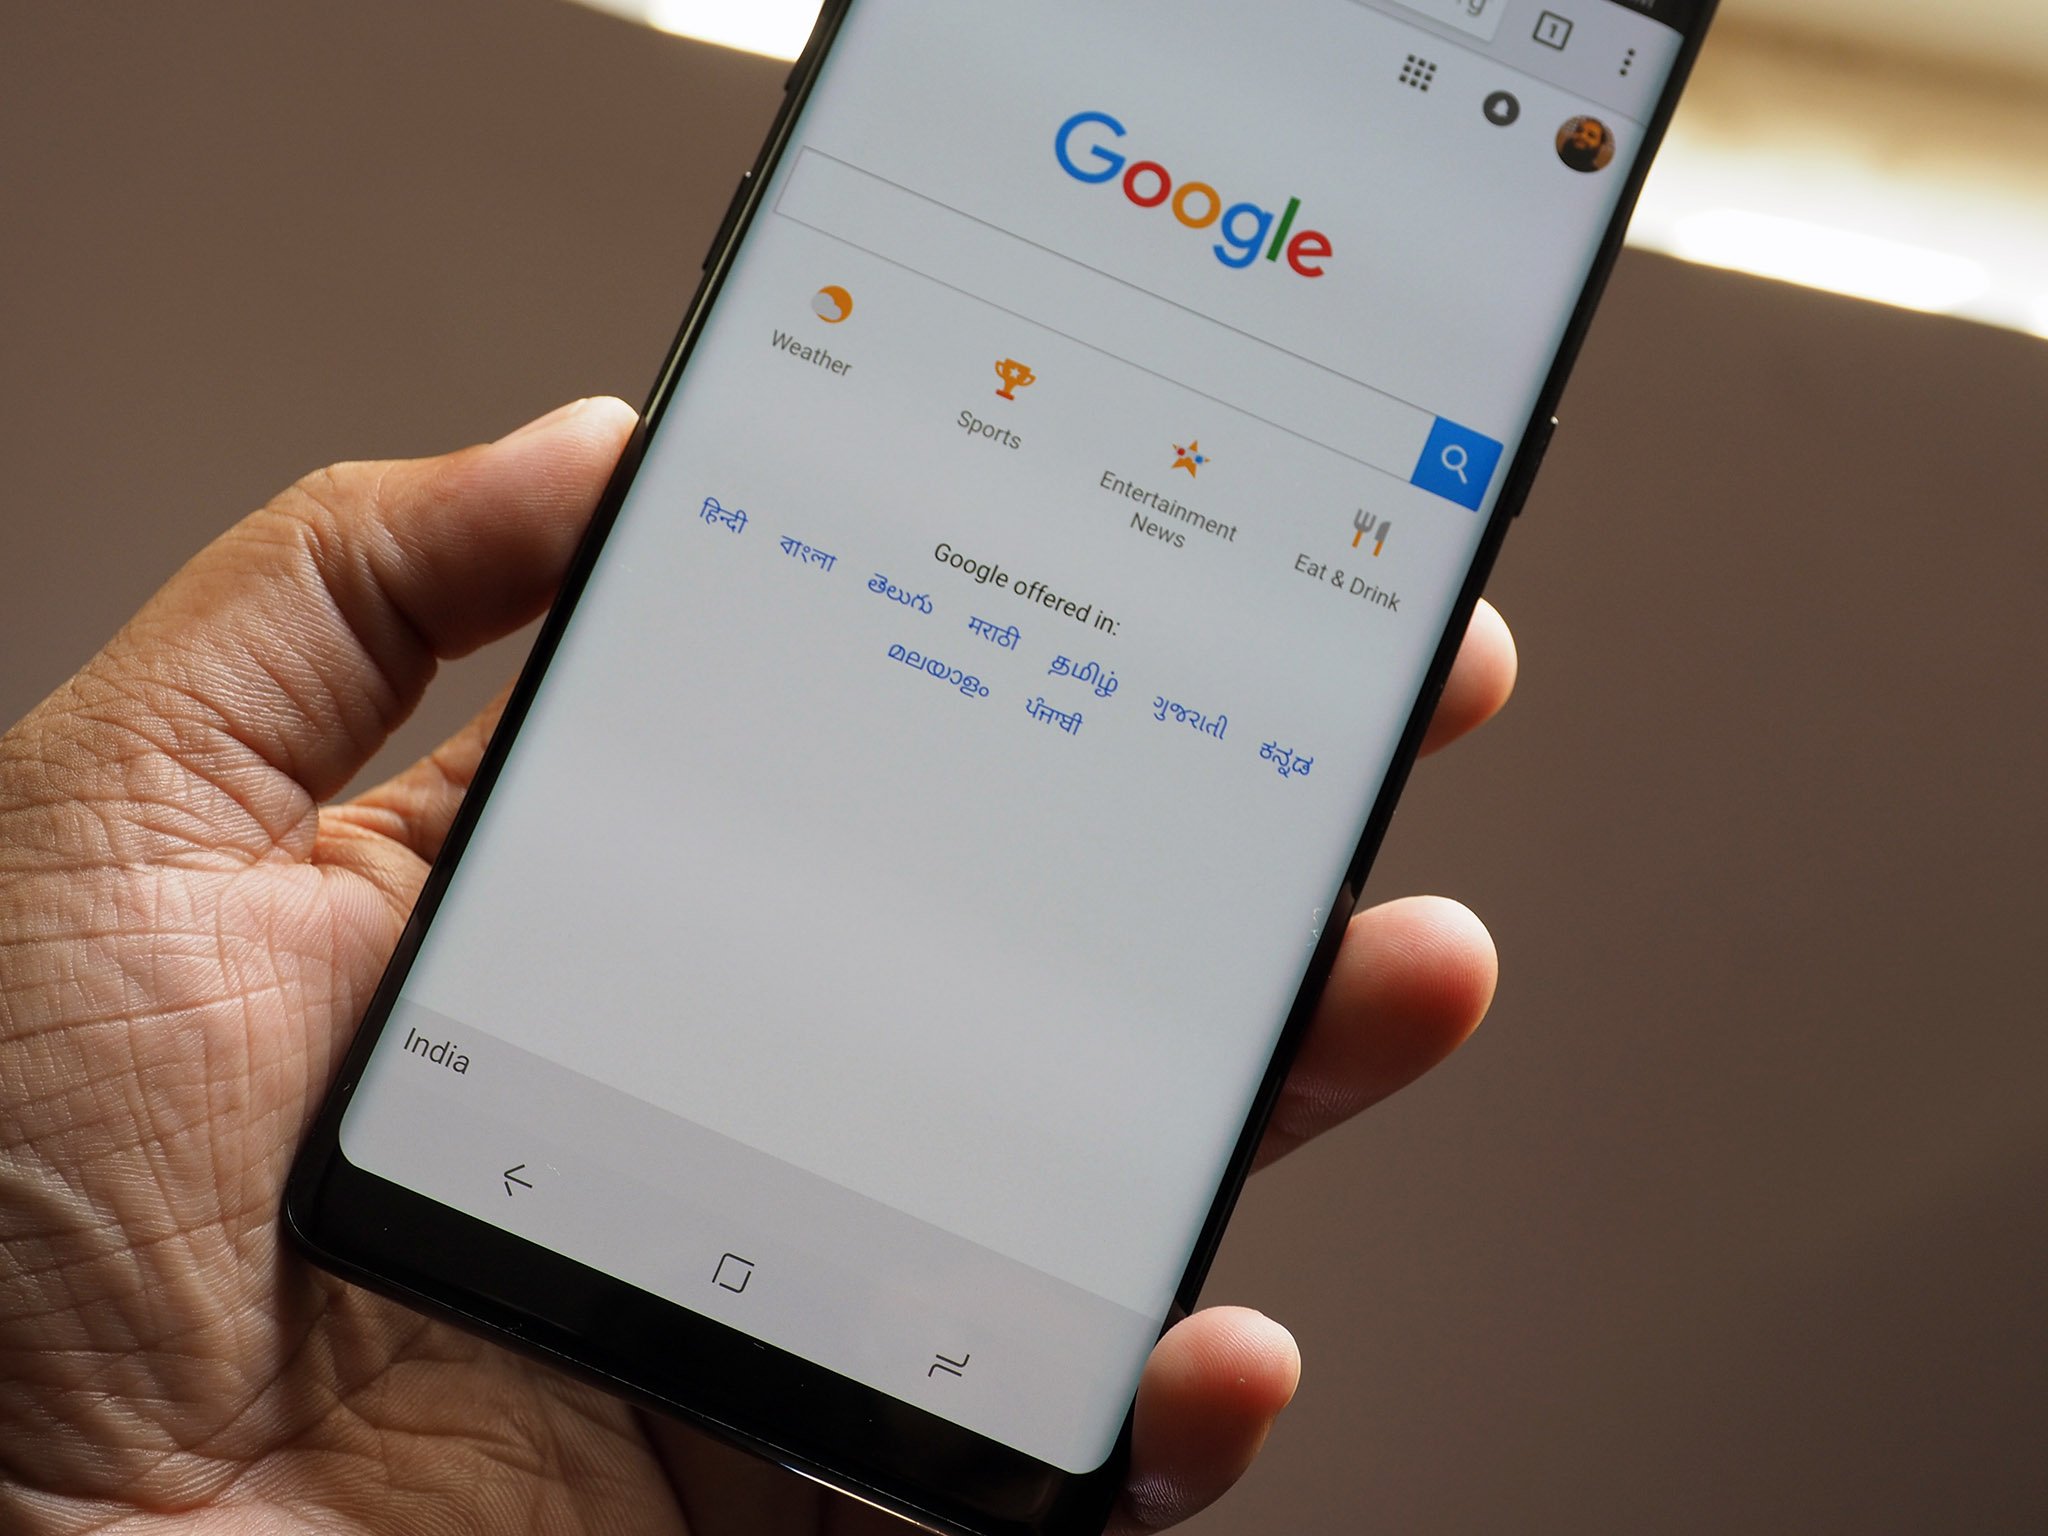 Google Search on Android